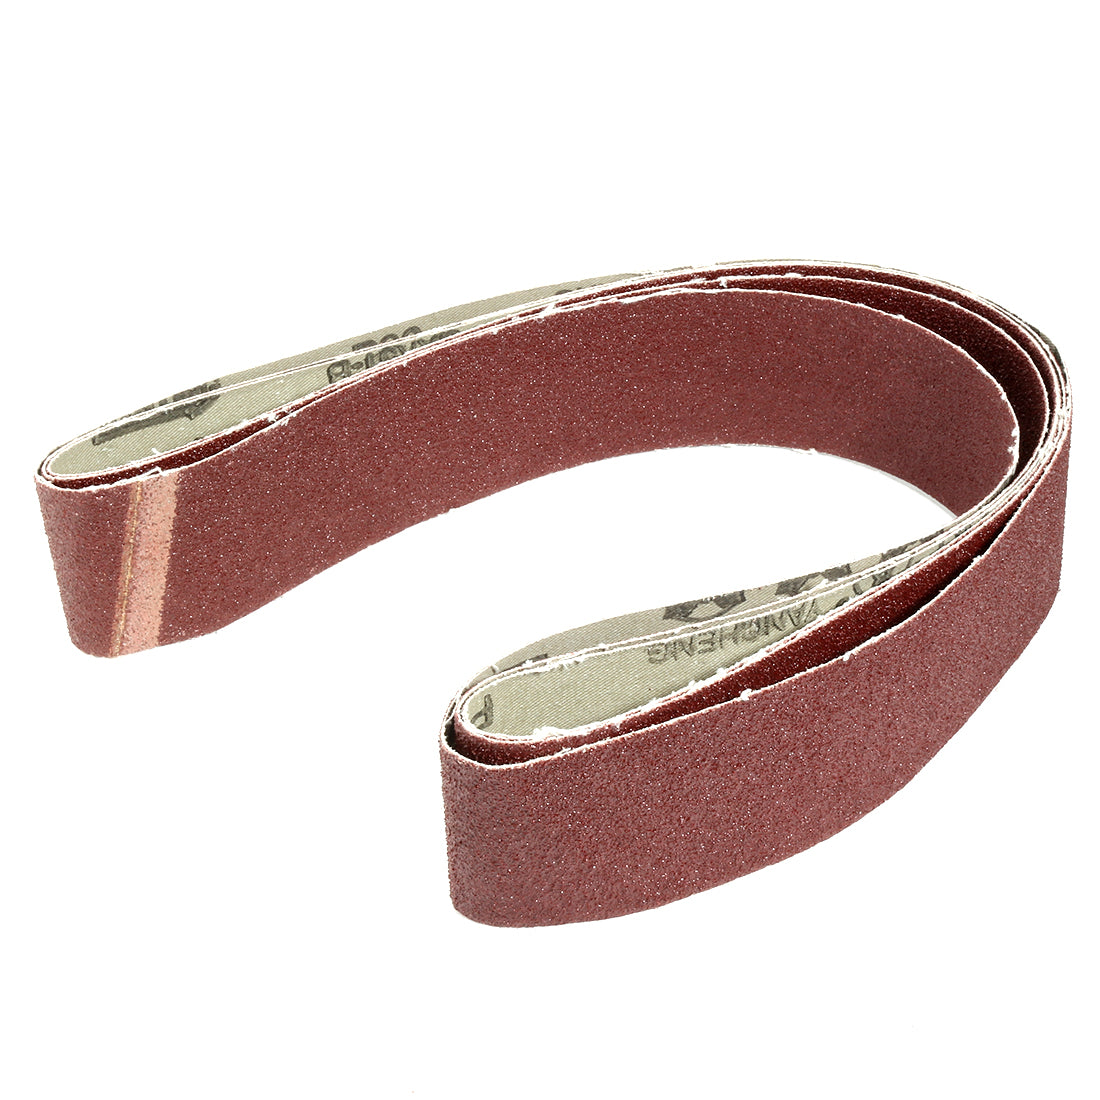 uxcell Uxcell 2-Inch x 42-Inch Aluminum Oxide Sanding Belt 60 Grits Lapped Joint 3pcs